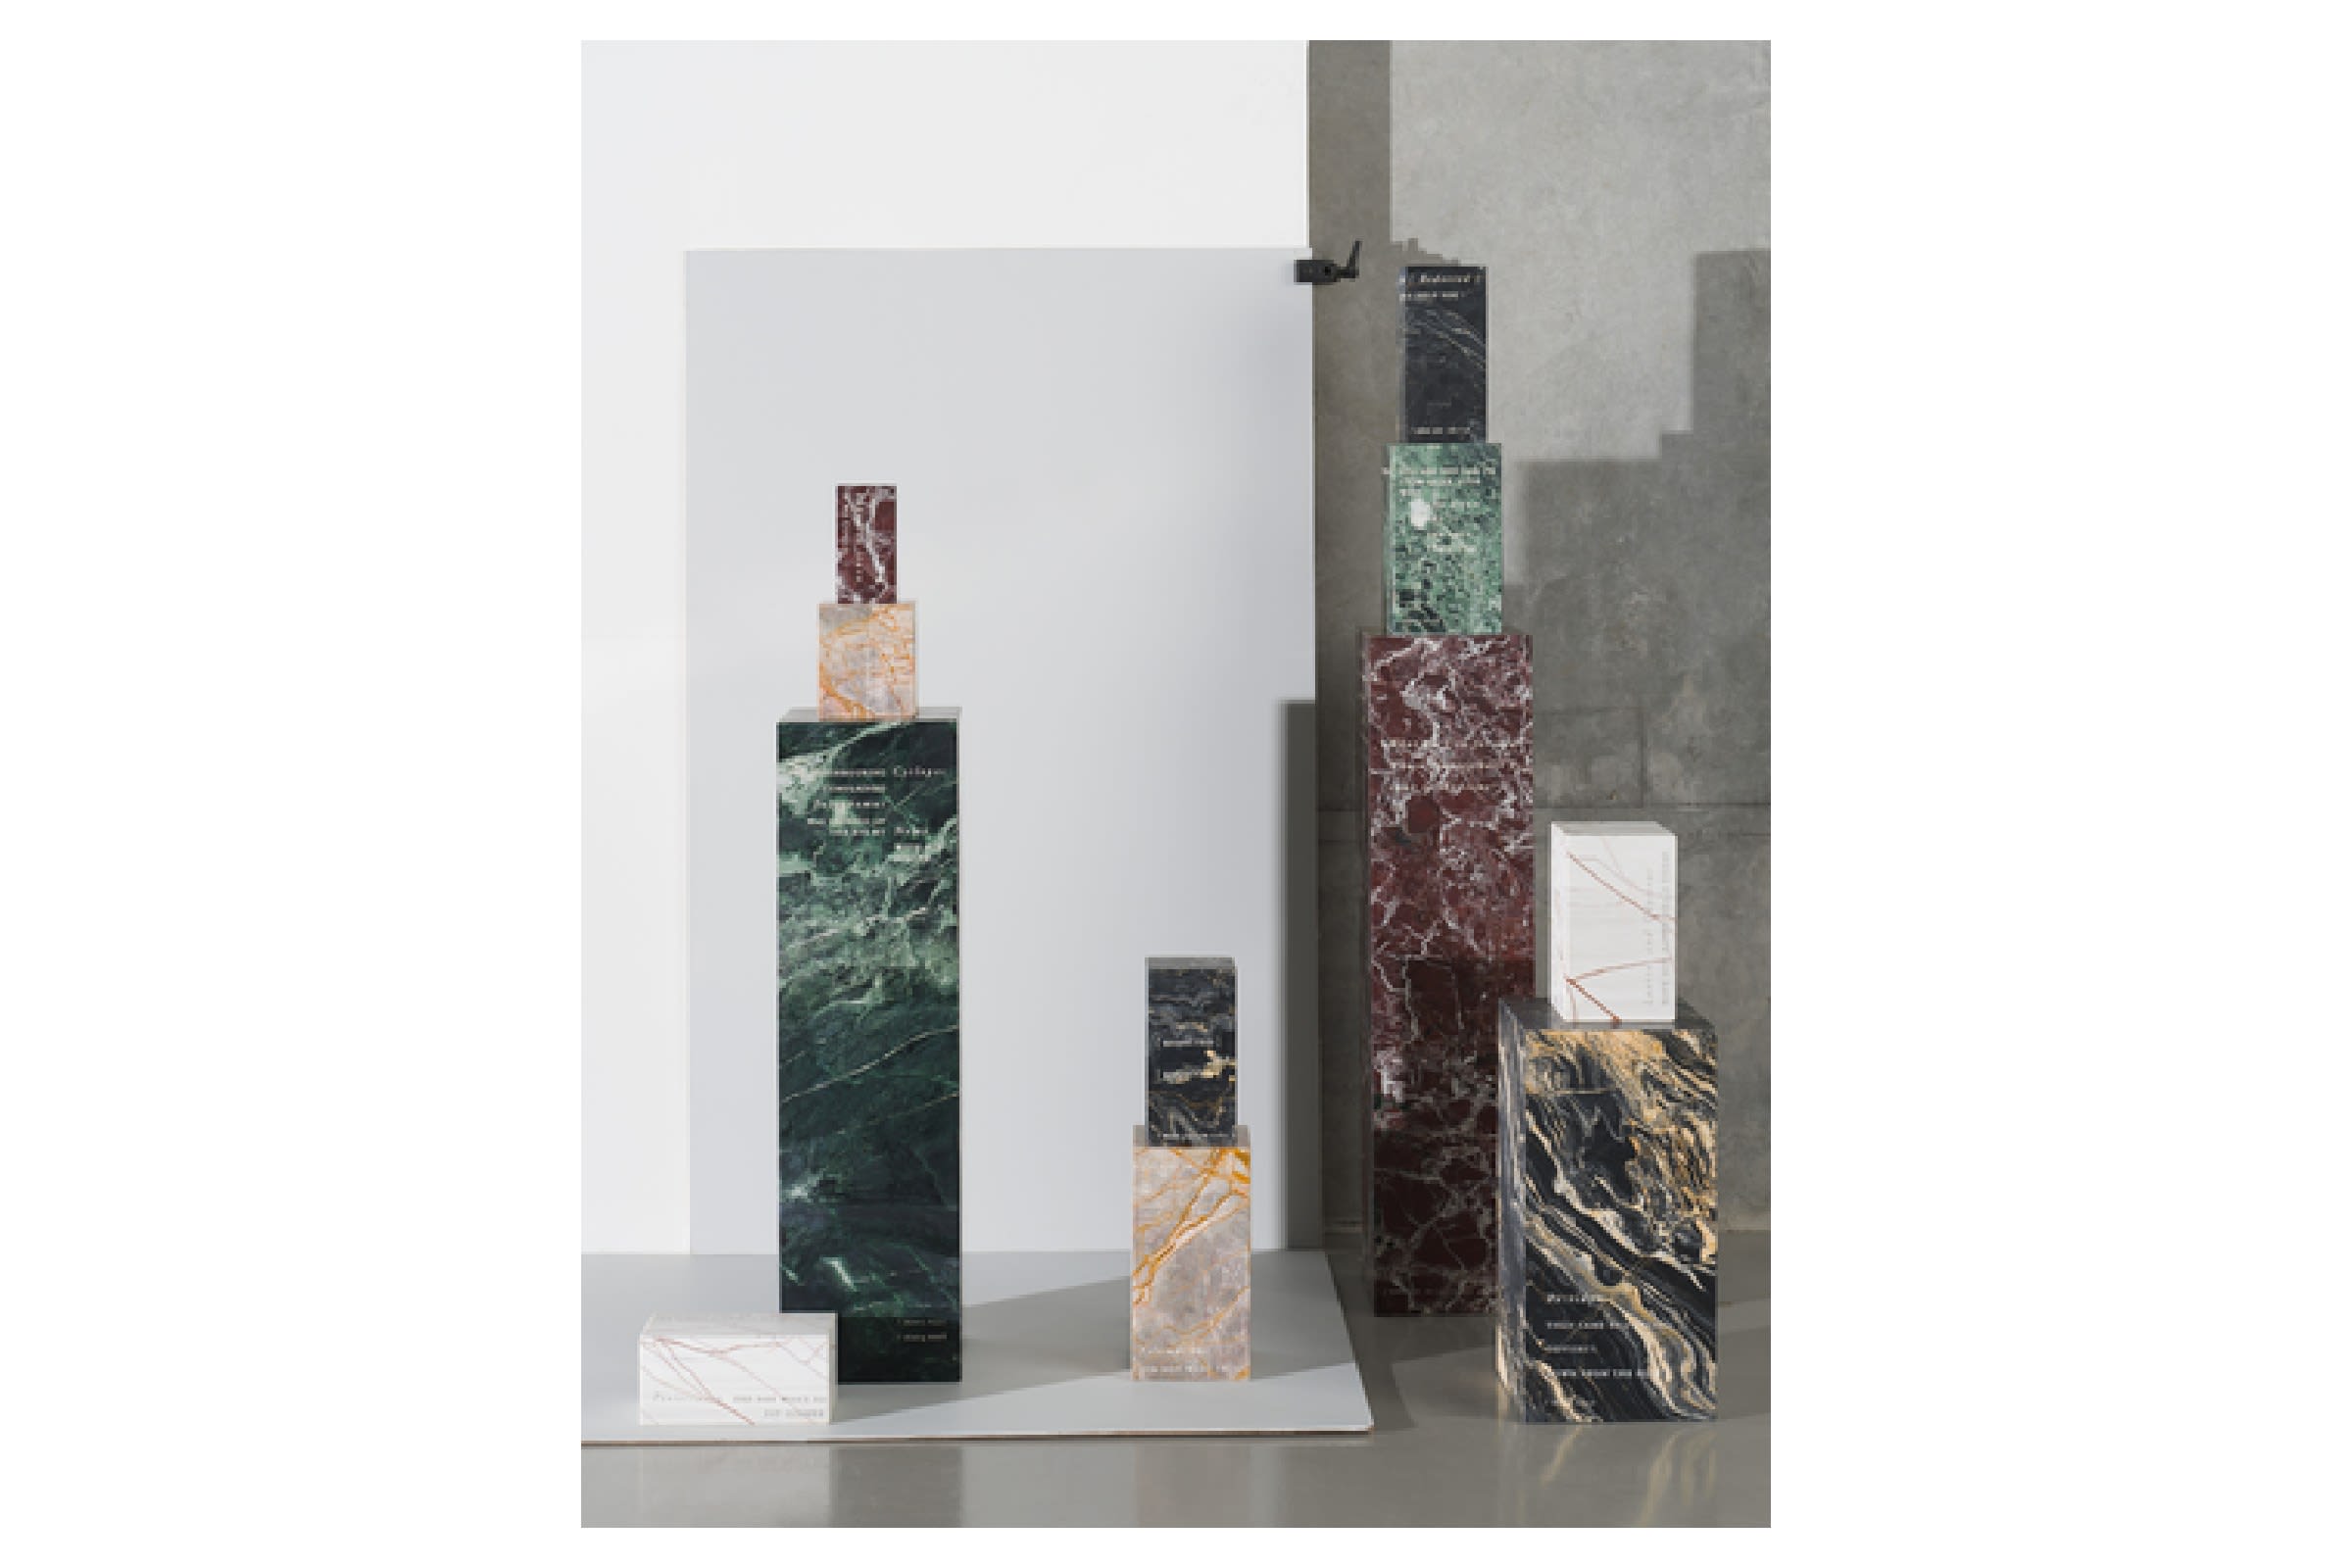 Stanislava Pinchuk, The Wine Dark Sea, set I, 2021, marble and enamel, dimensions variable. Photo by Matthew Stanton. Courtesy of the artist and Yavuz Gallery.